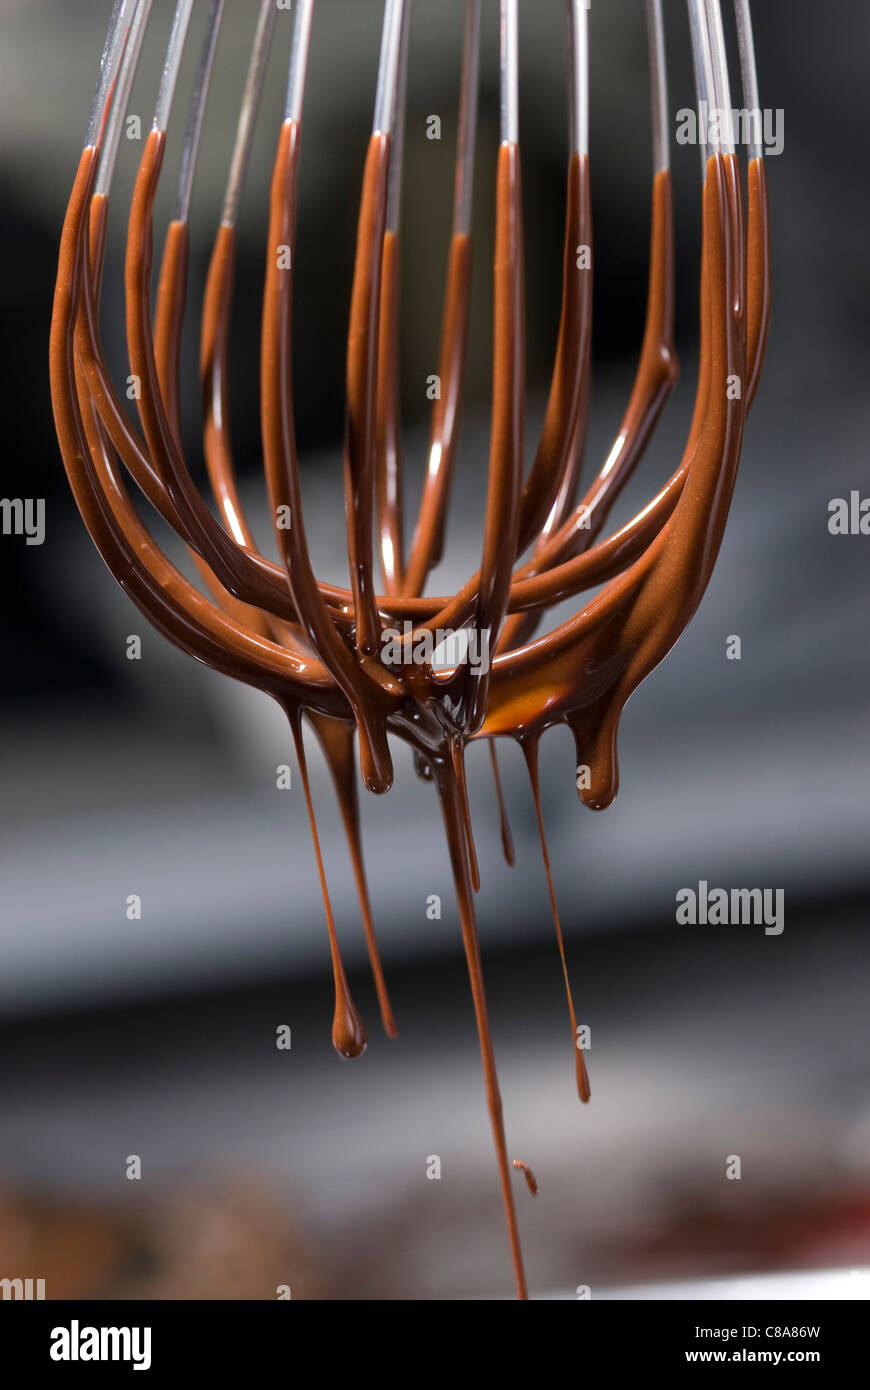 Melted chocolate dripping from a whisk Stock Photo